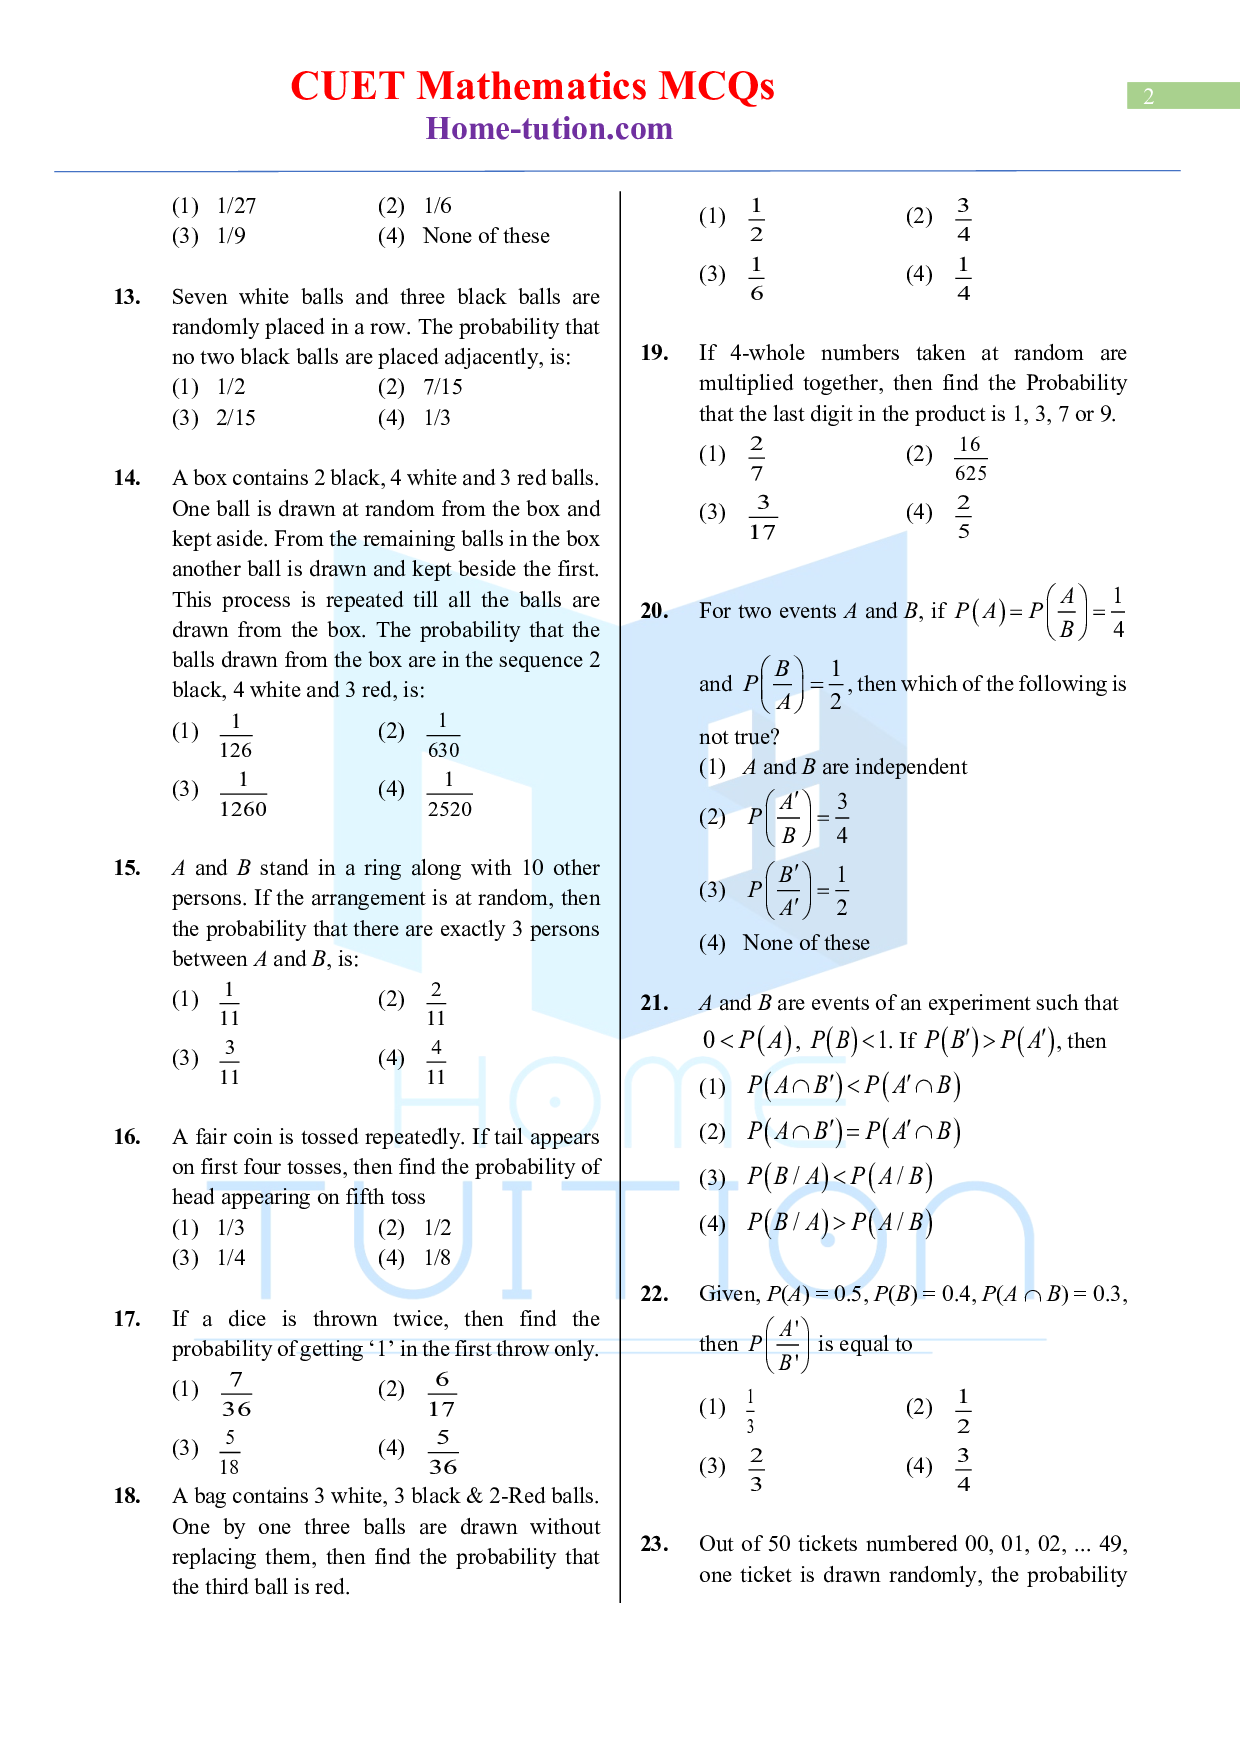 CUET MCQ Questions For Maths Chapter-12 Probability